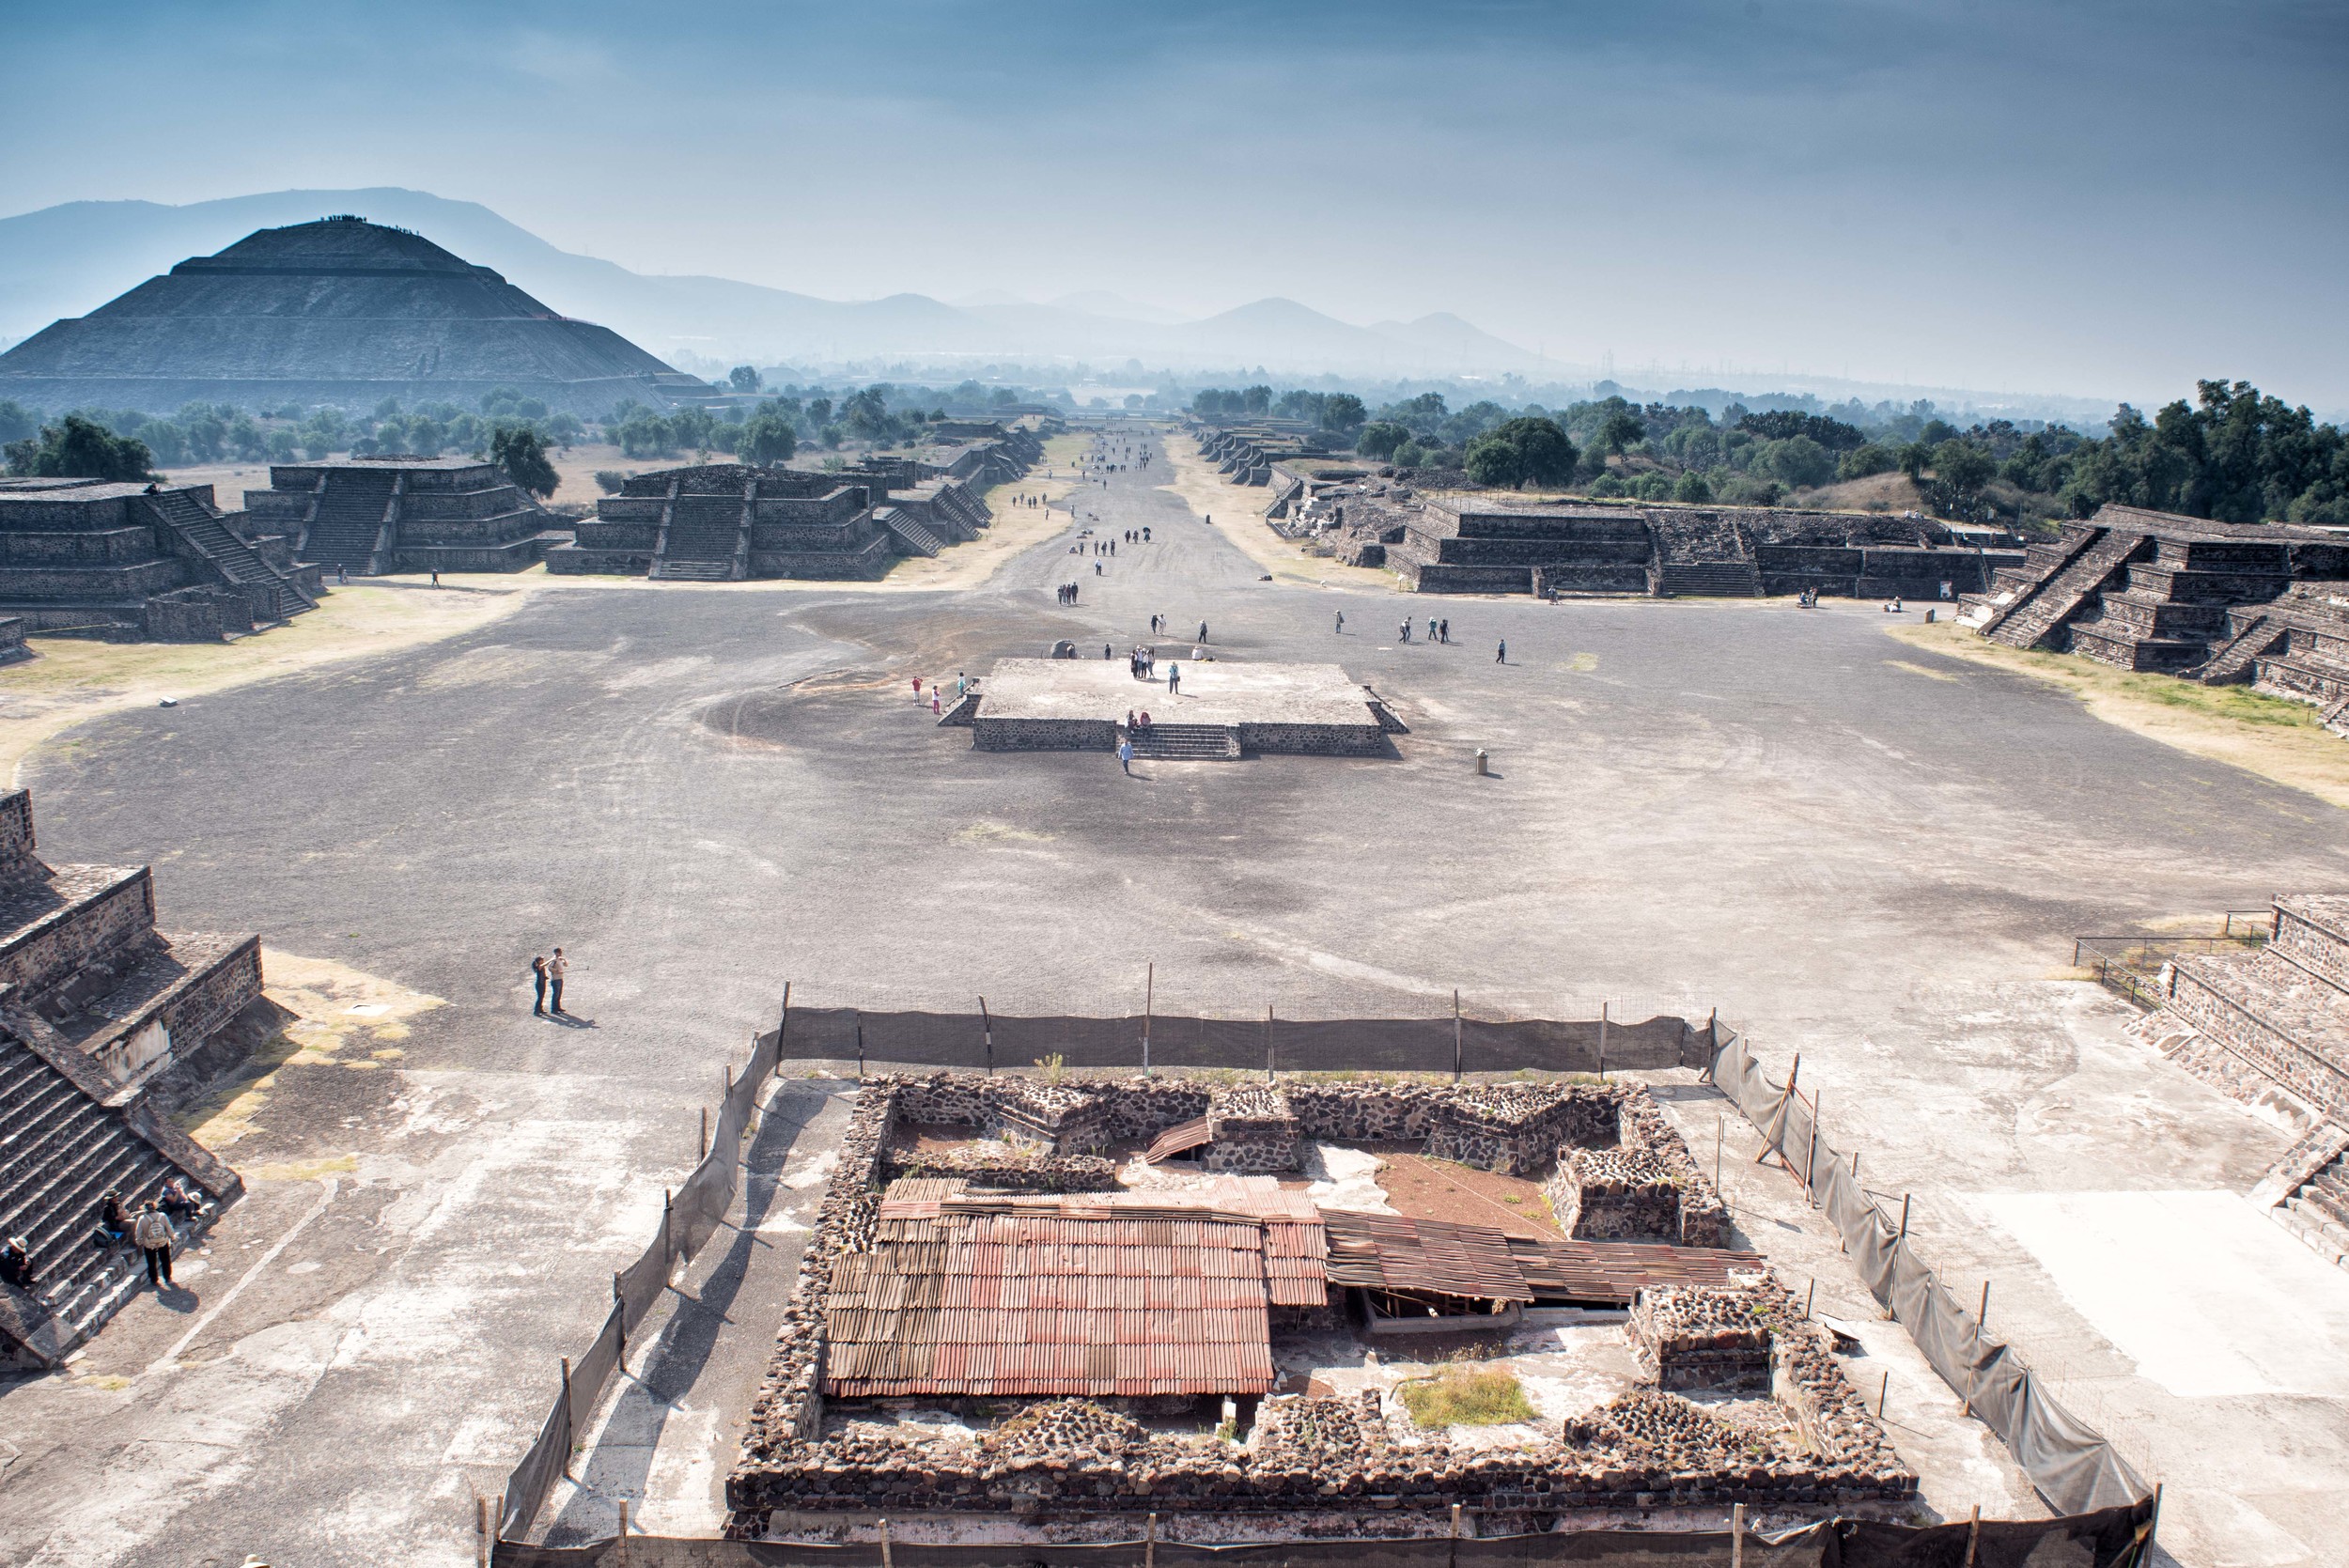  View on the Teotihuacan site, from the Moon pyramid.&nbsp; 